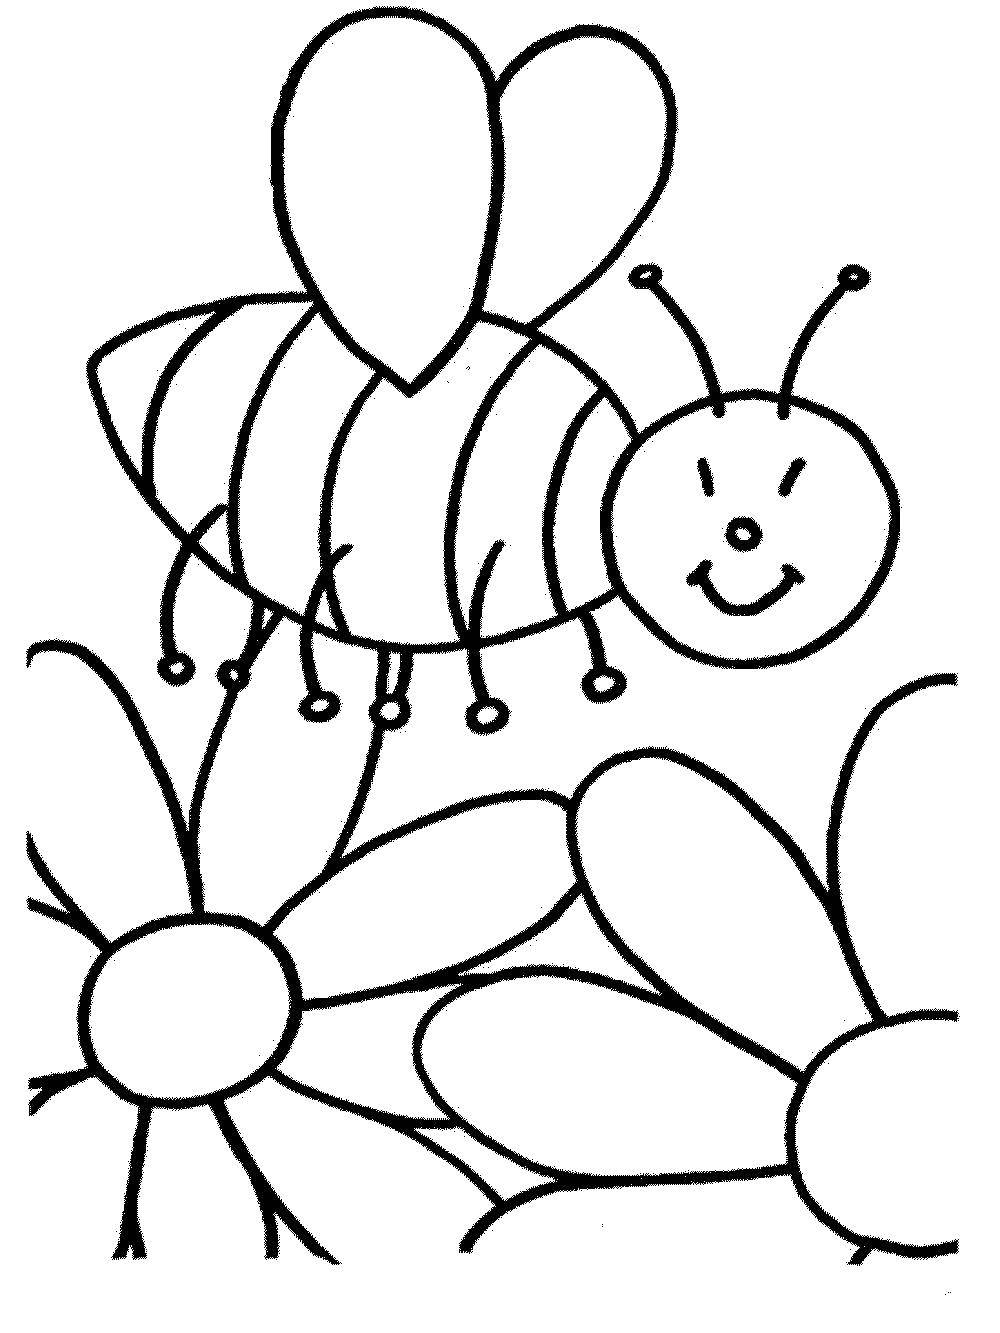 Coloring Bee. Category Coloring pages for kids. Tags:  kids, bee, flower.